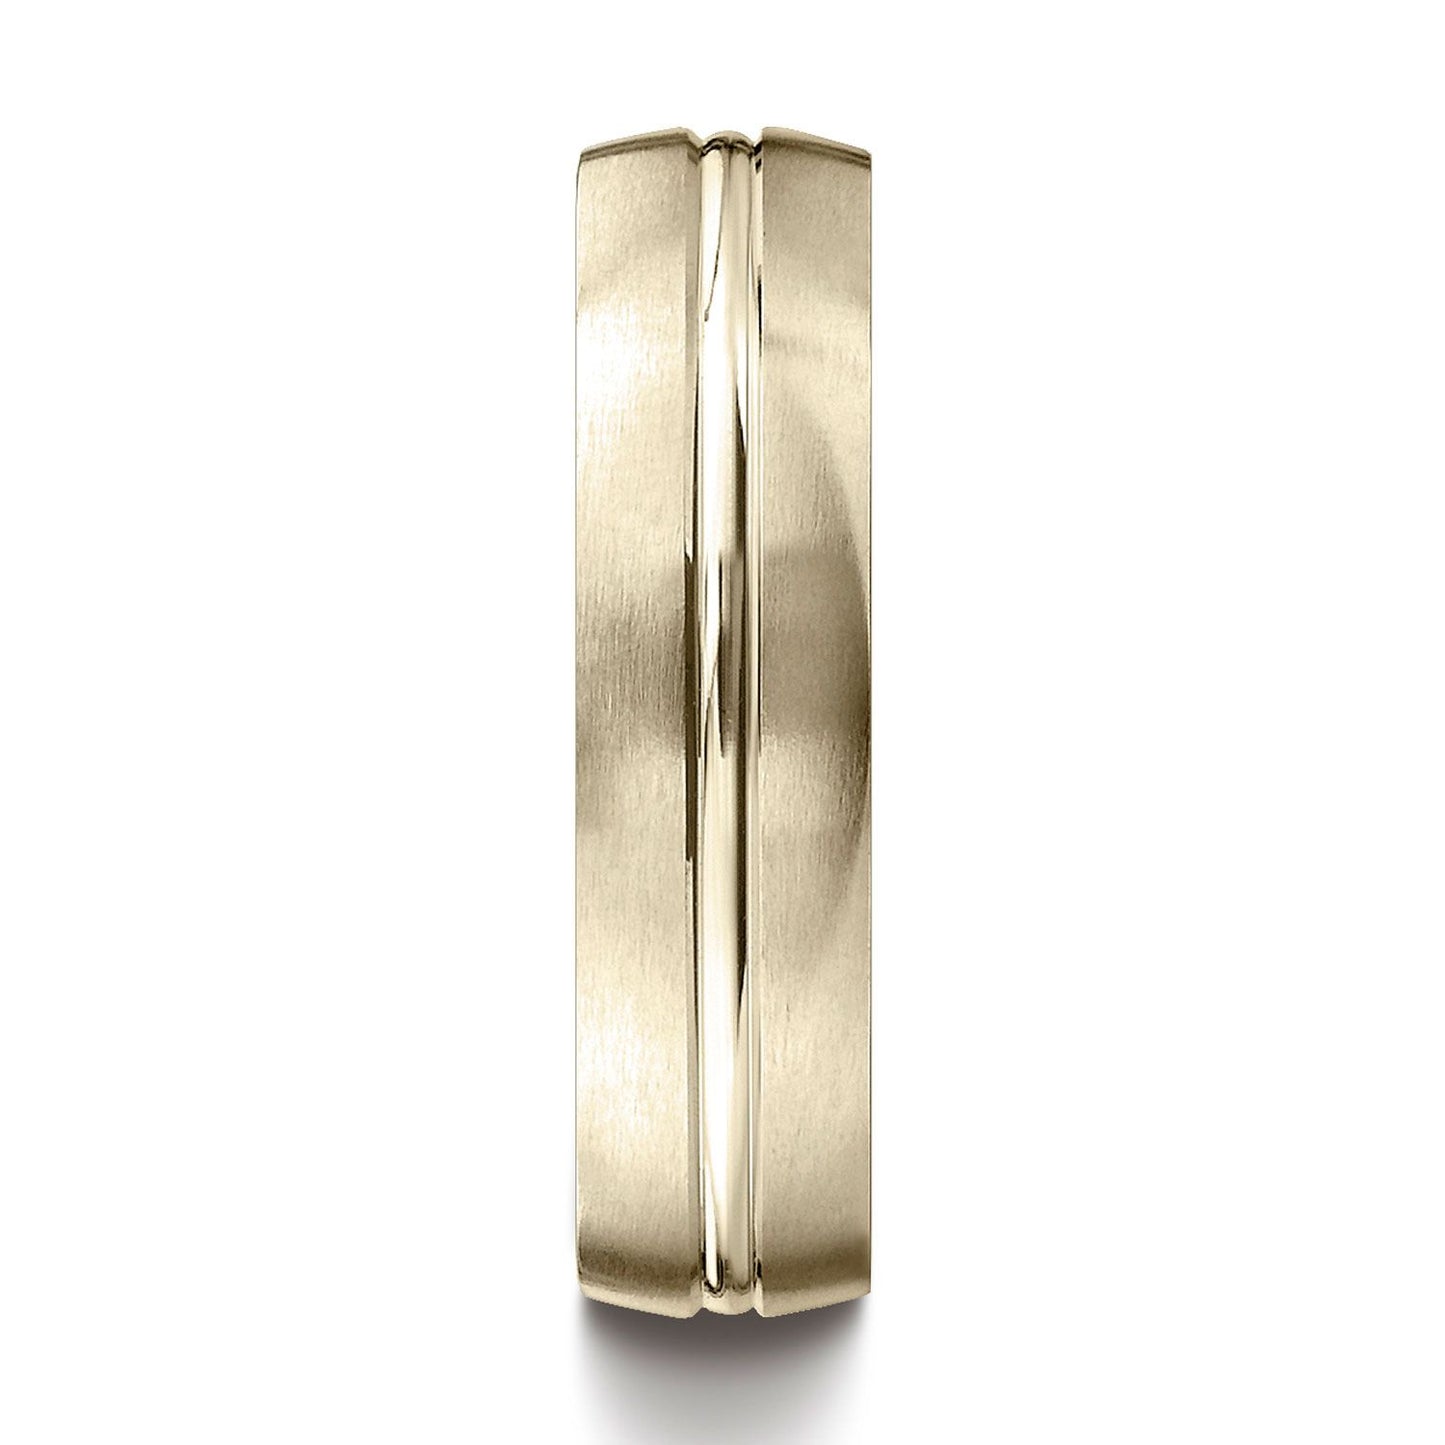 14k Yellow Gold 6mm Comfort-fit Satin-finished With High Polished Center Cut Carved Design Band